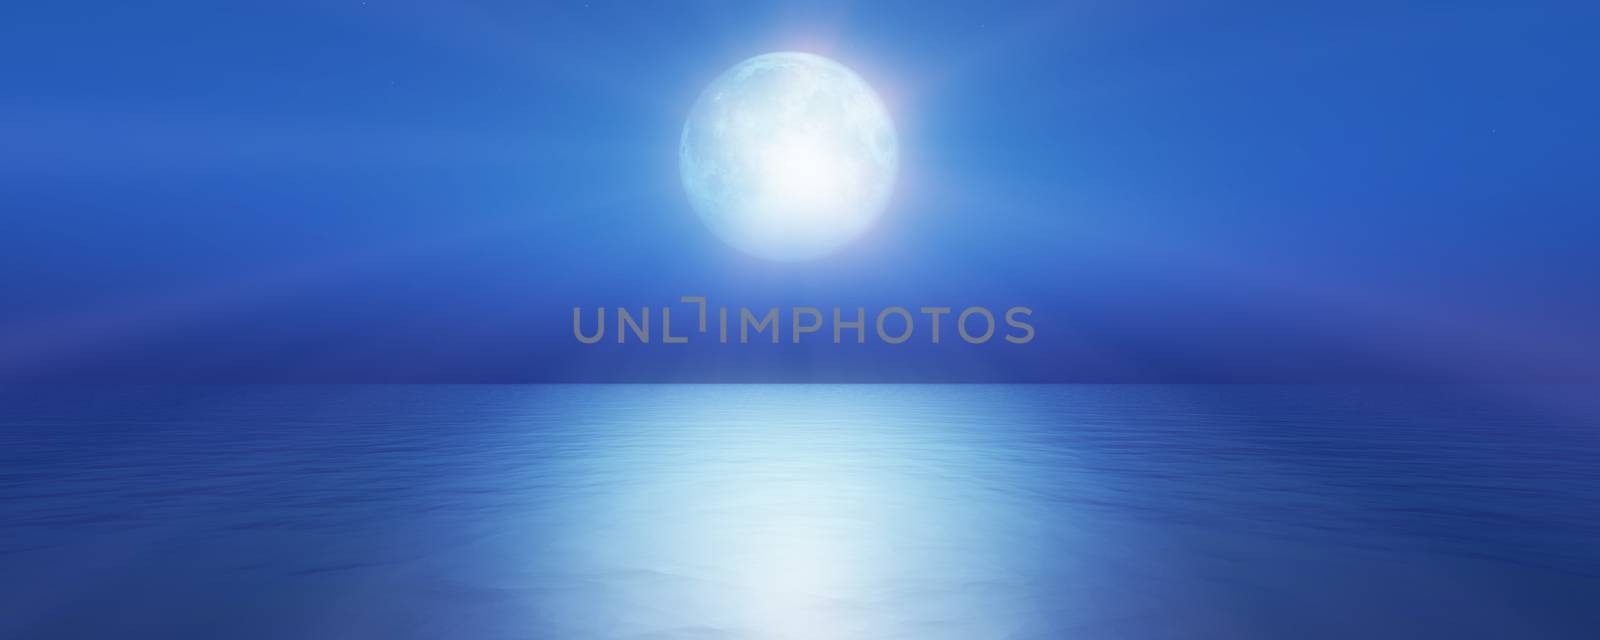 full moon in the sky background reflection in the sea ocean water. 3D render illustration